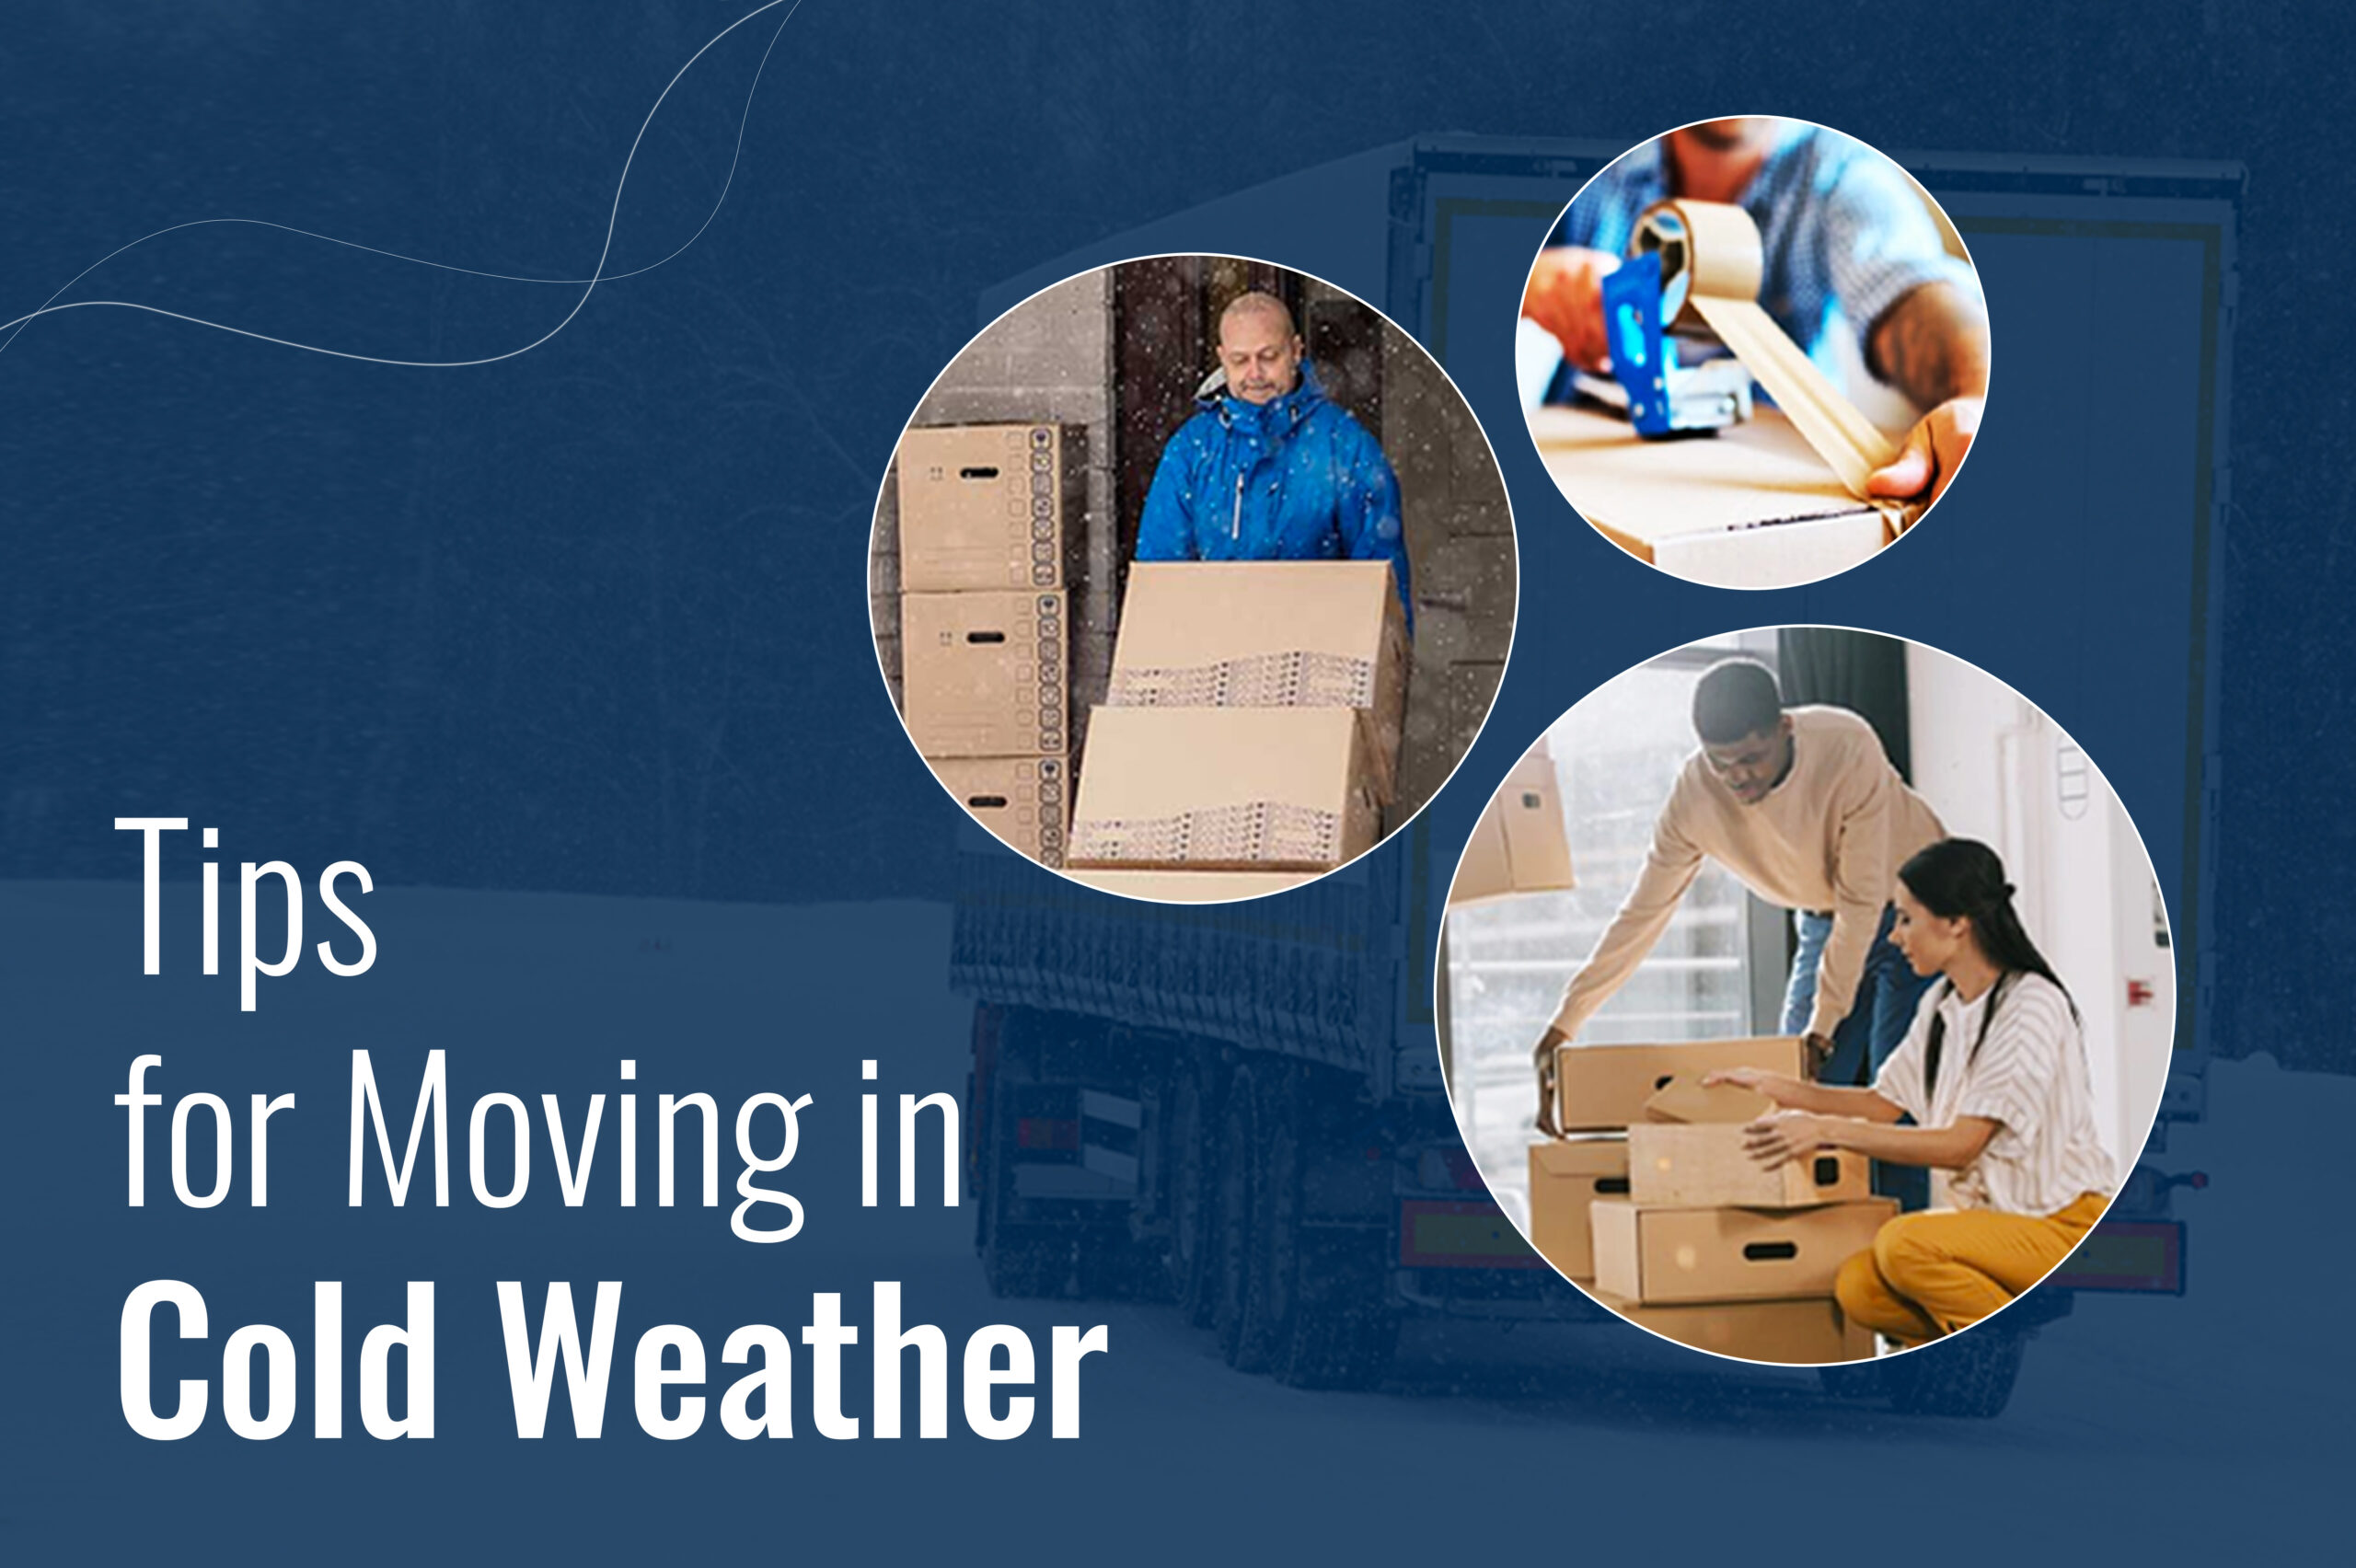 Tips for moving in Cold Weather